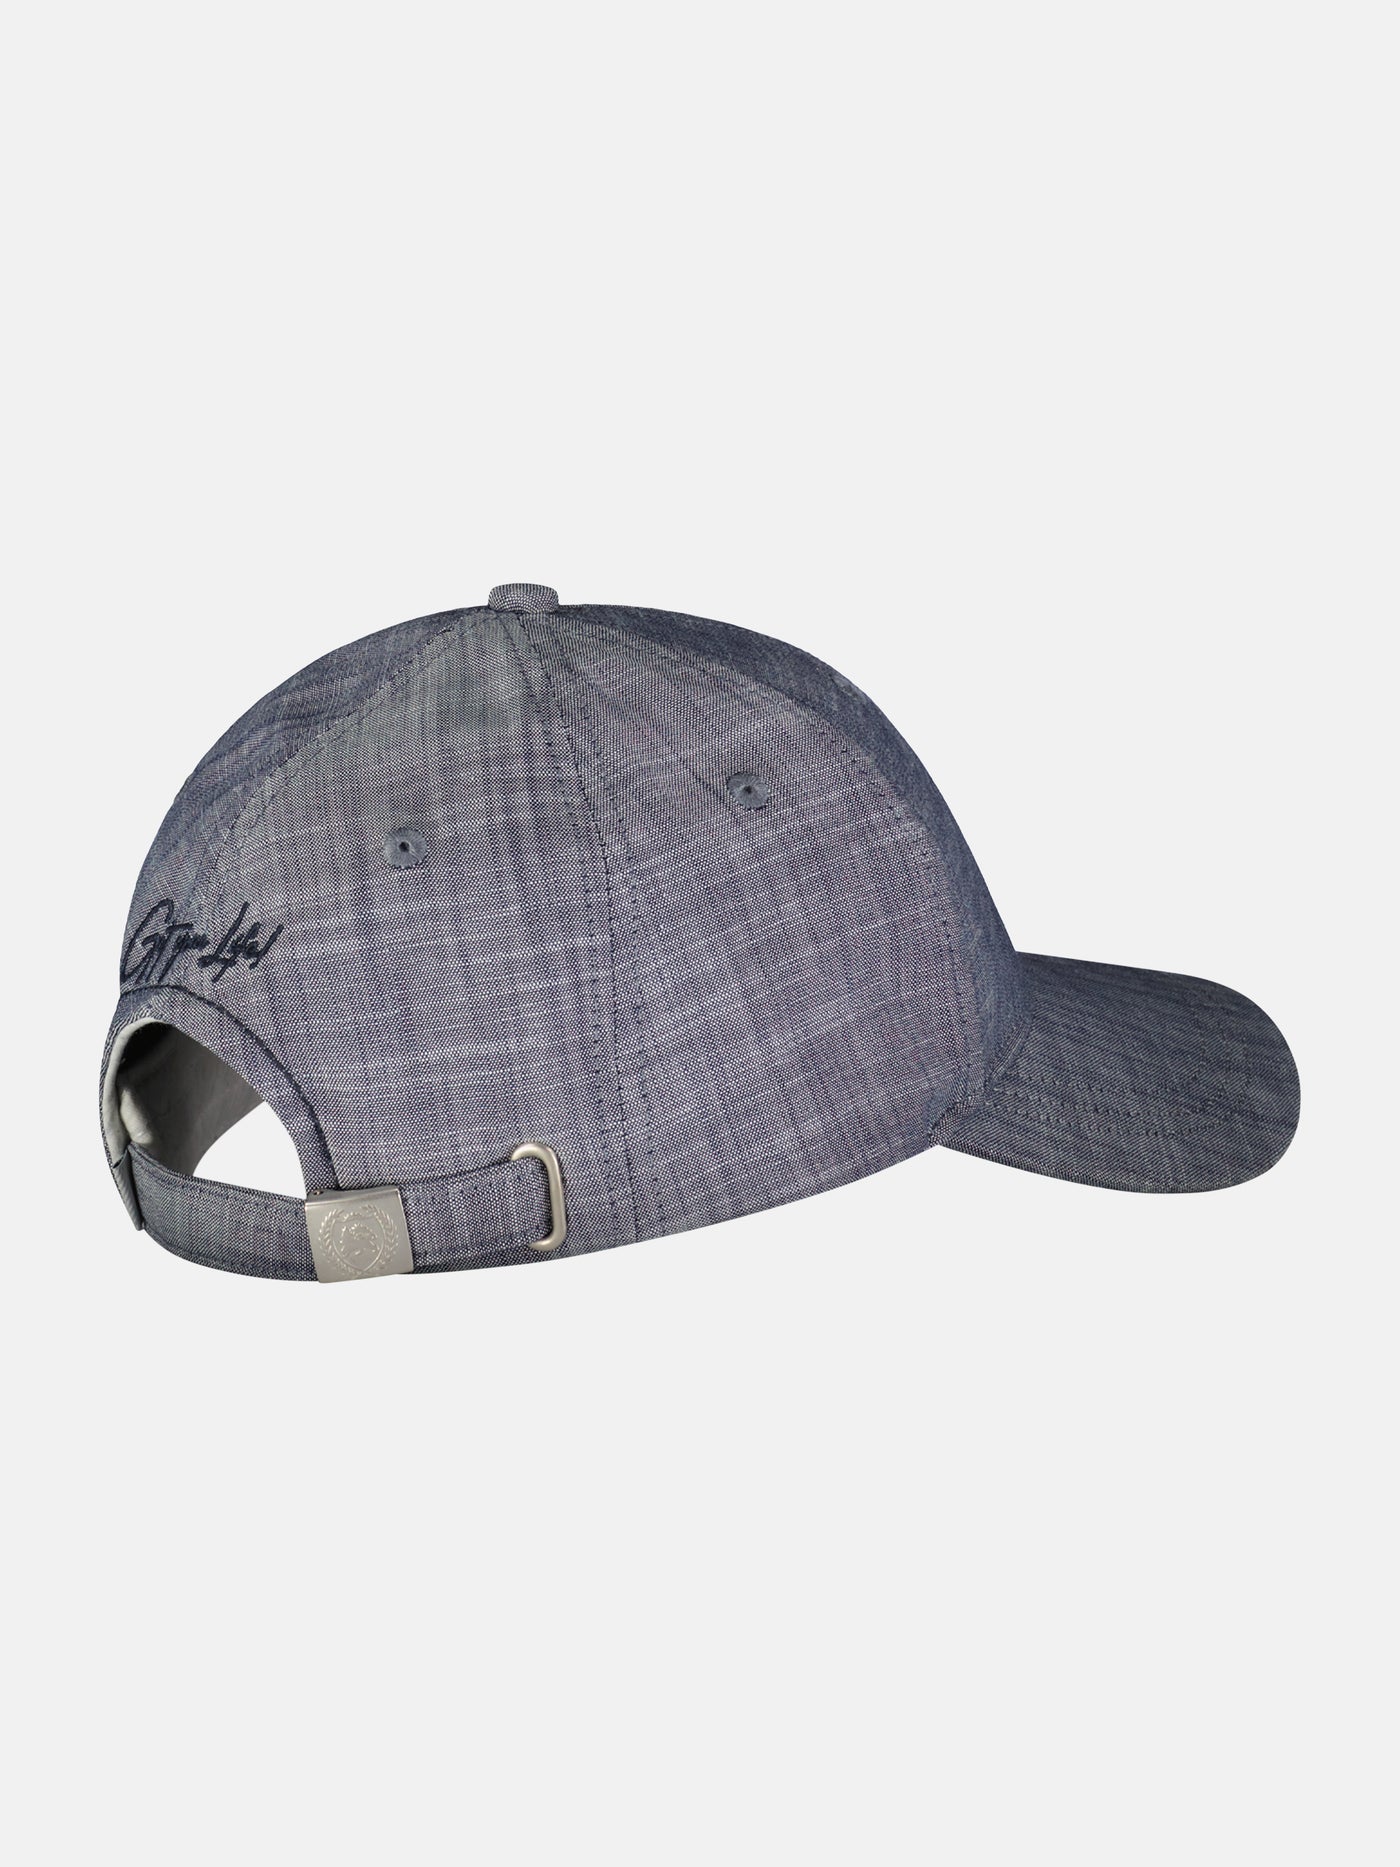 Baseball cap with a checkered look